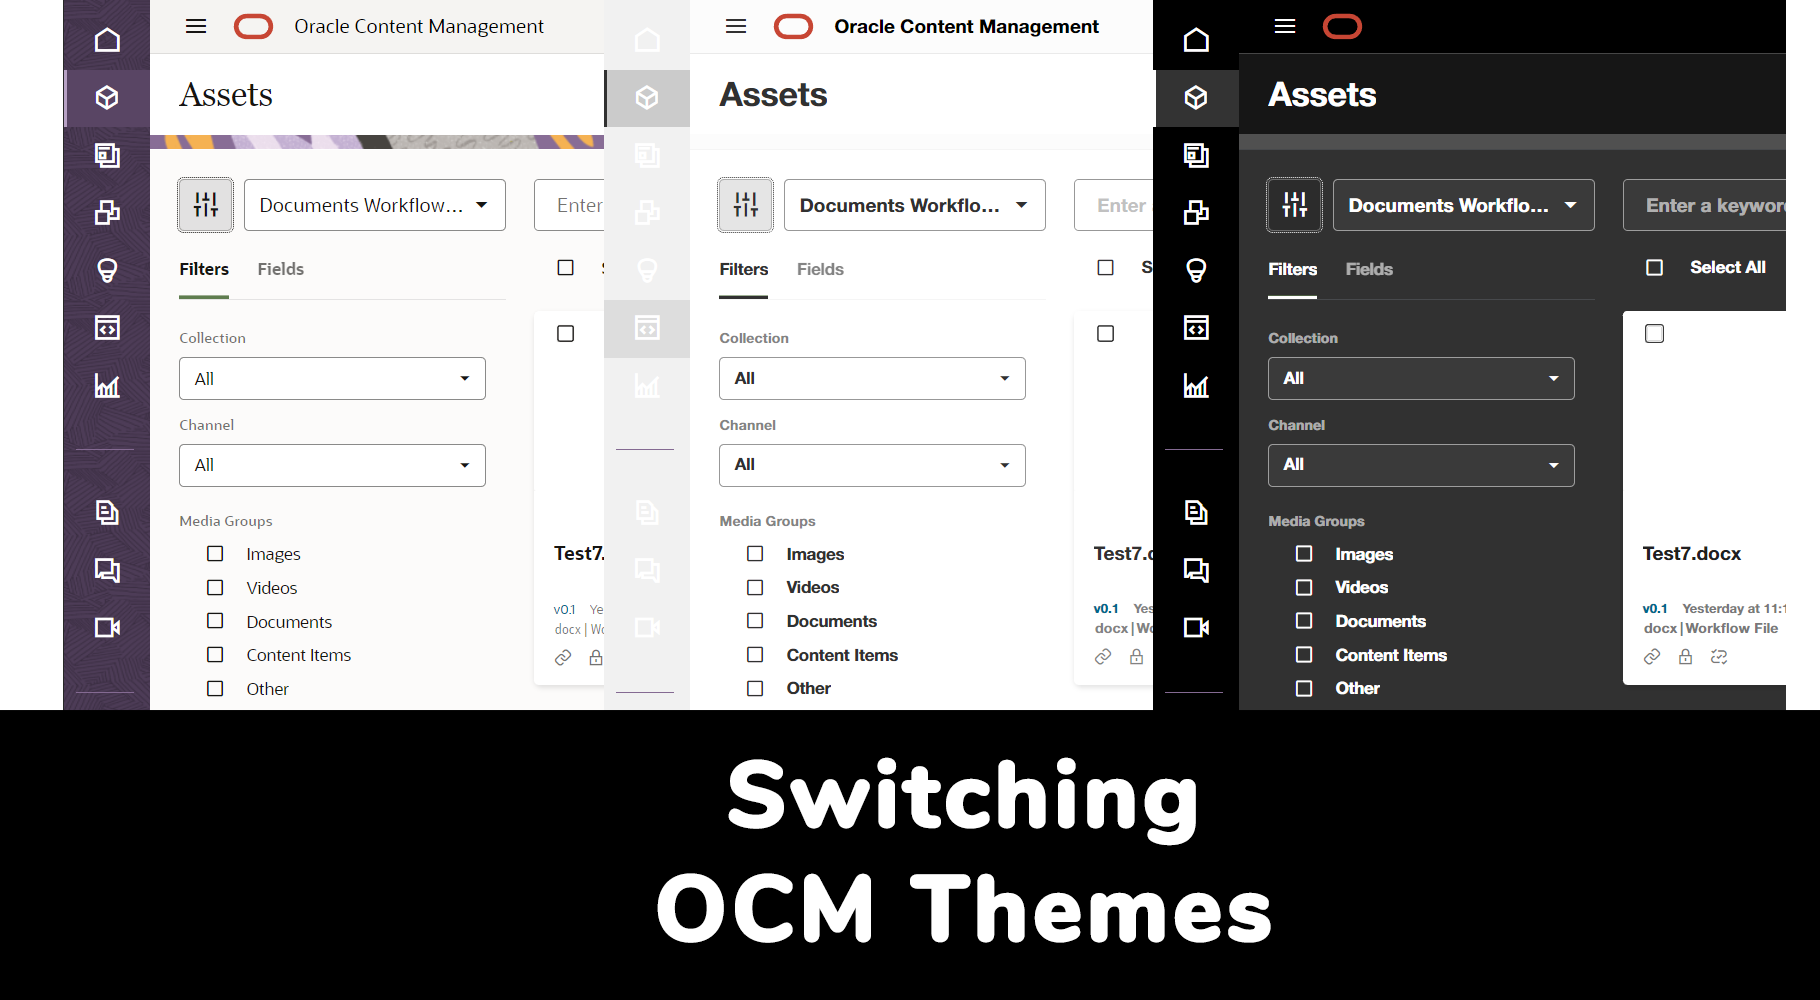 Oracle Content Management Admin UI - Themes (ie Dark Mode)